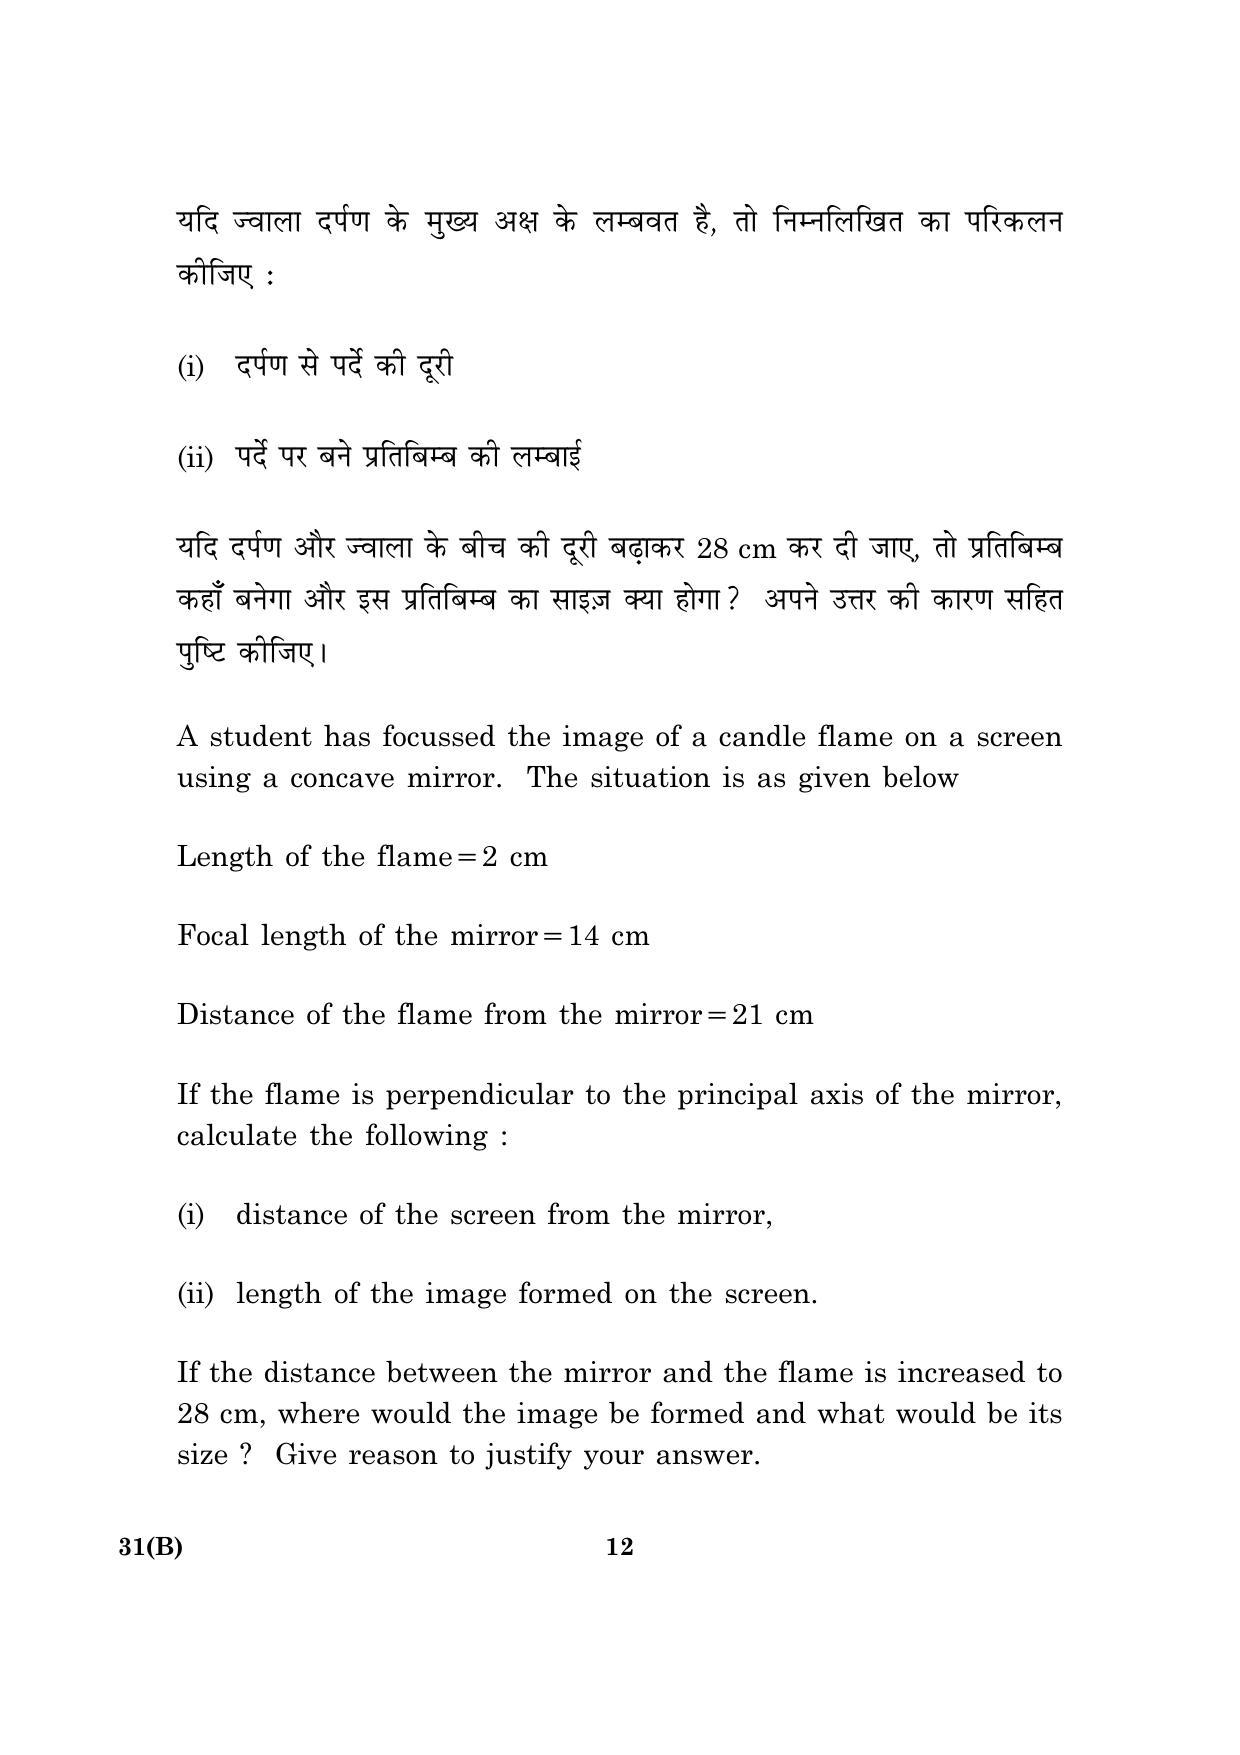 CBSE Class 10 031(B) Science 2016 Question Paper - Page 12